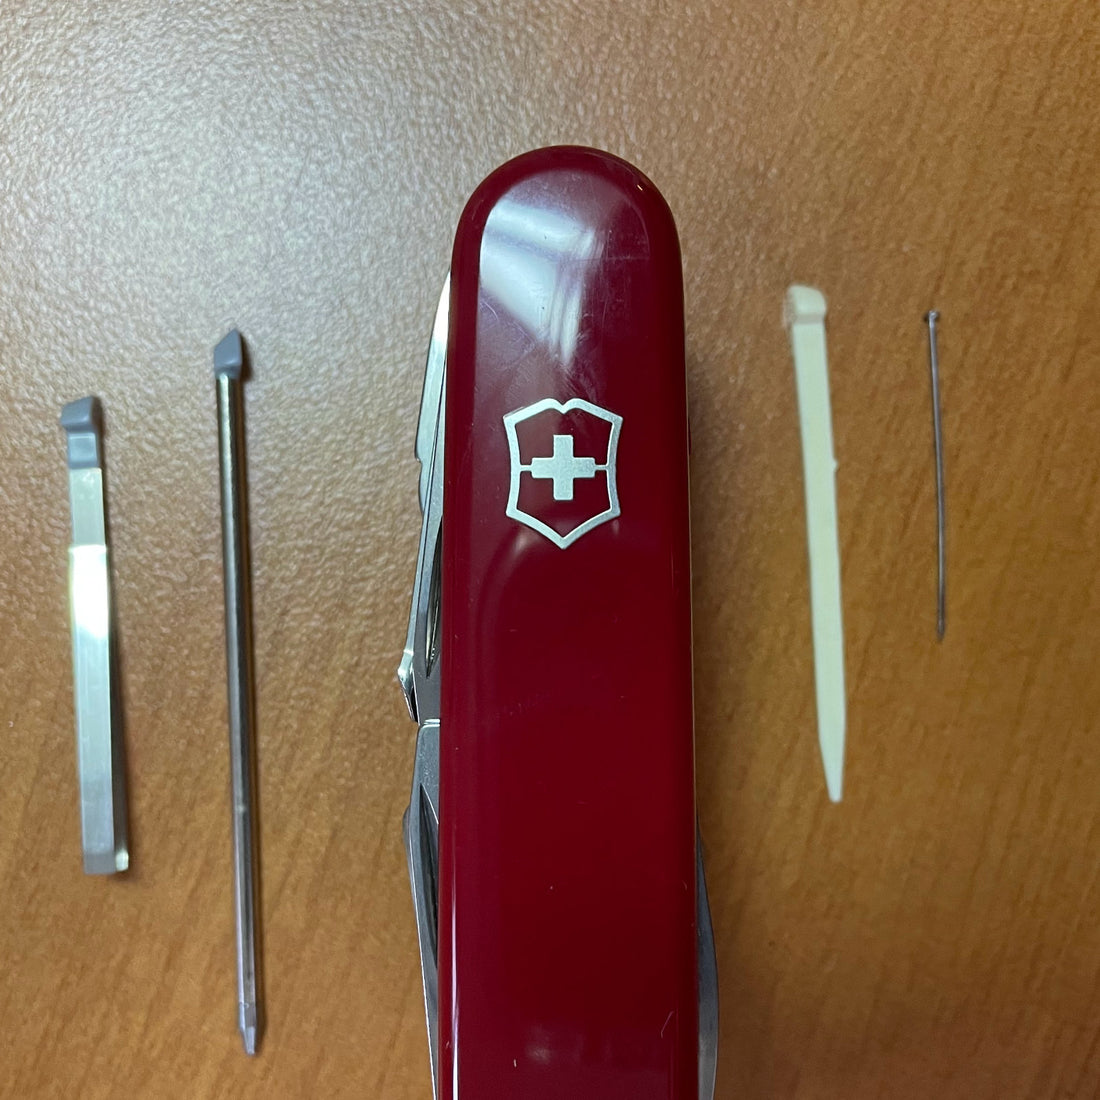 Cleaning and Maintaining Your Swiss Army Knife